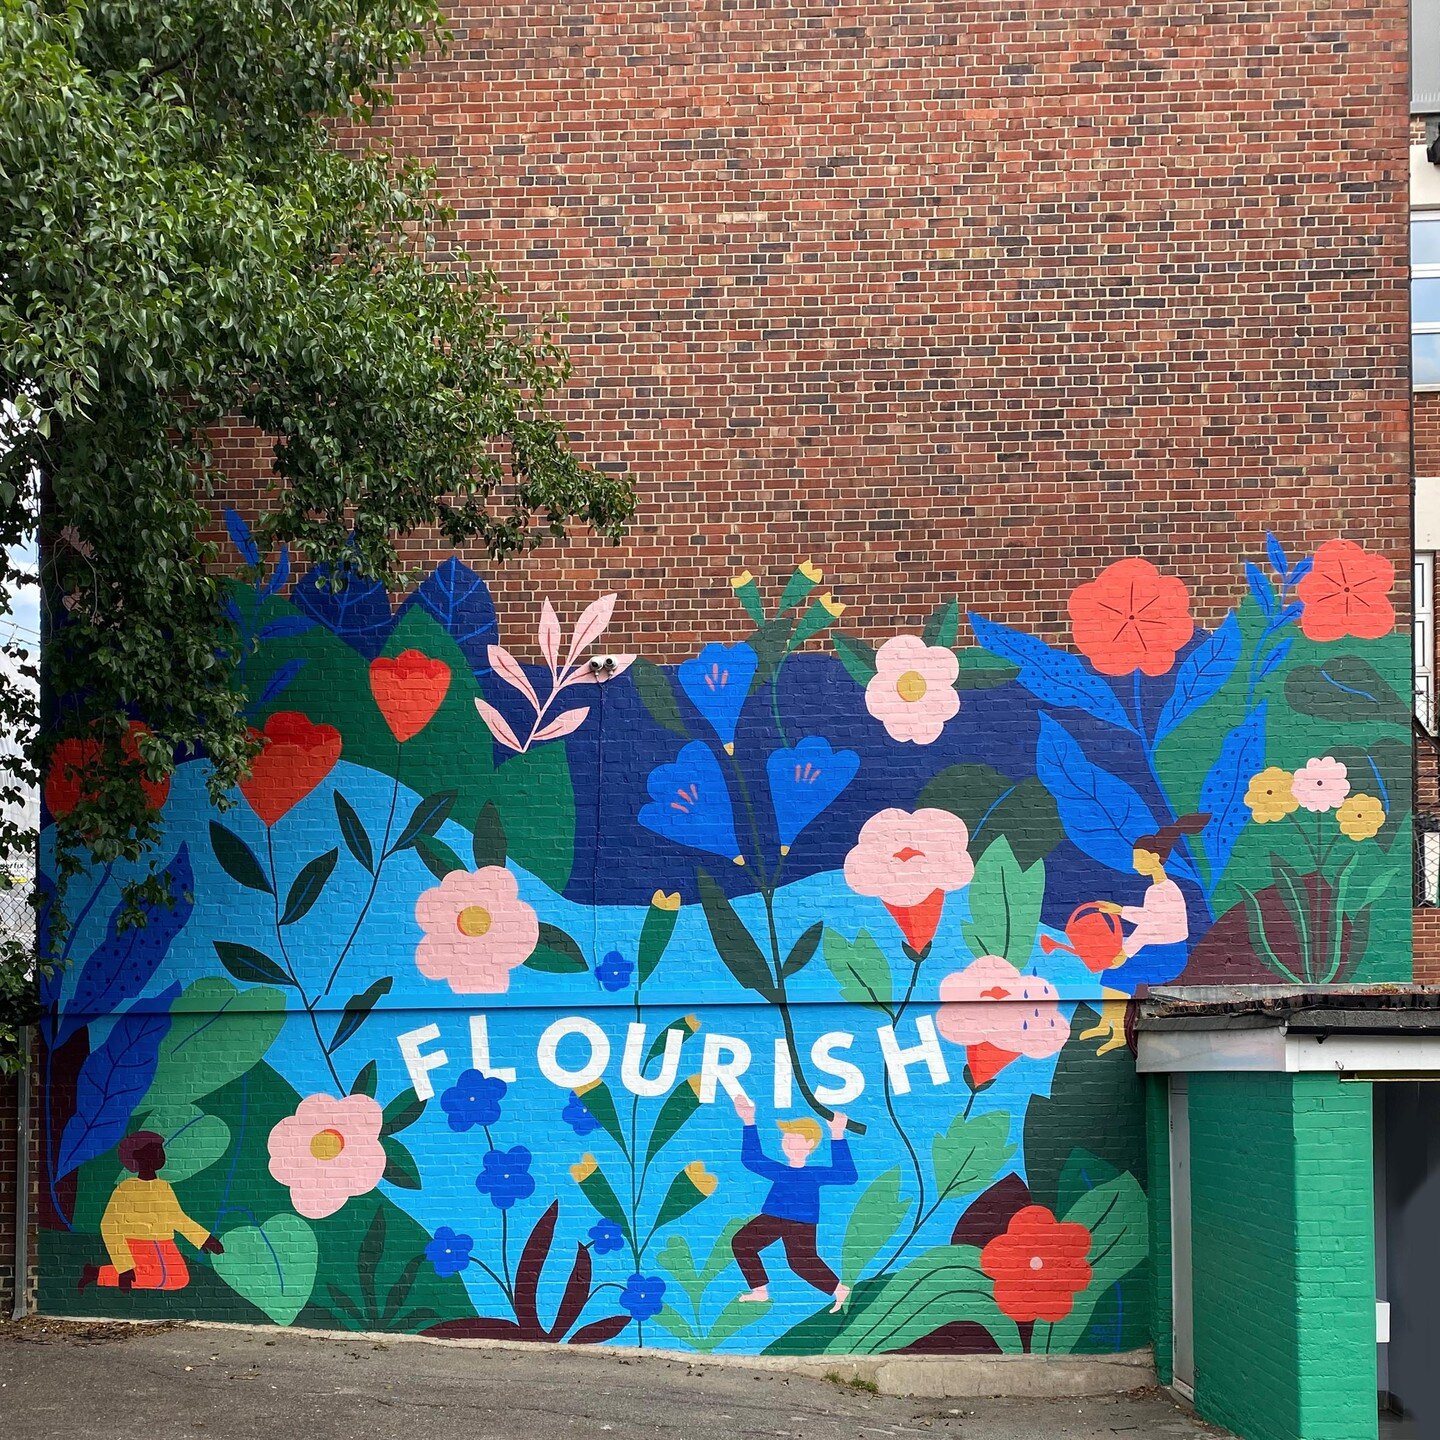 An absolute pleasure to paint this mural for Salusbury School in Queens Park, London.

Love how this palette pops creating a charming wonderland of children amongst the oversized wildflowers. A bold, positive piece reminiscent of a children's picture